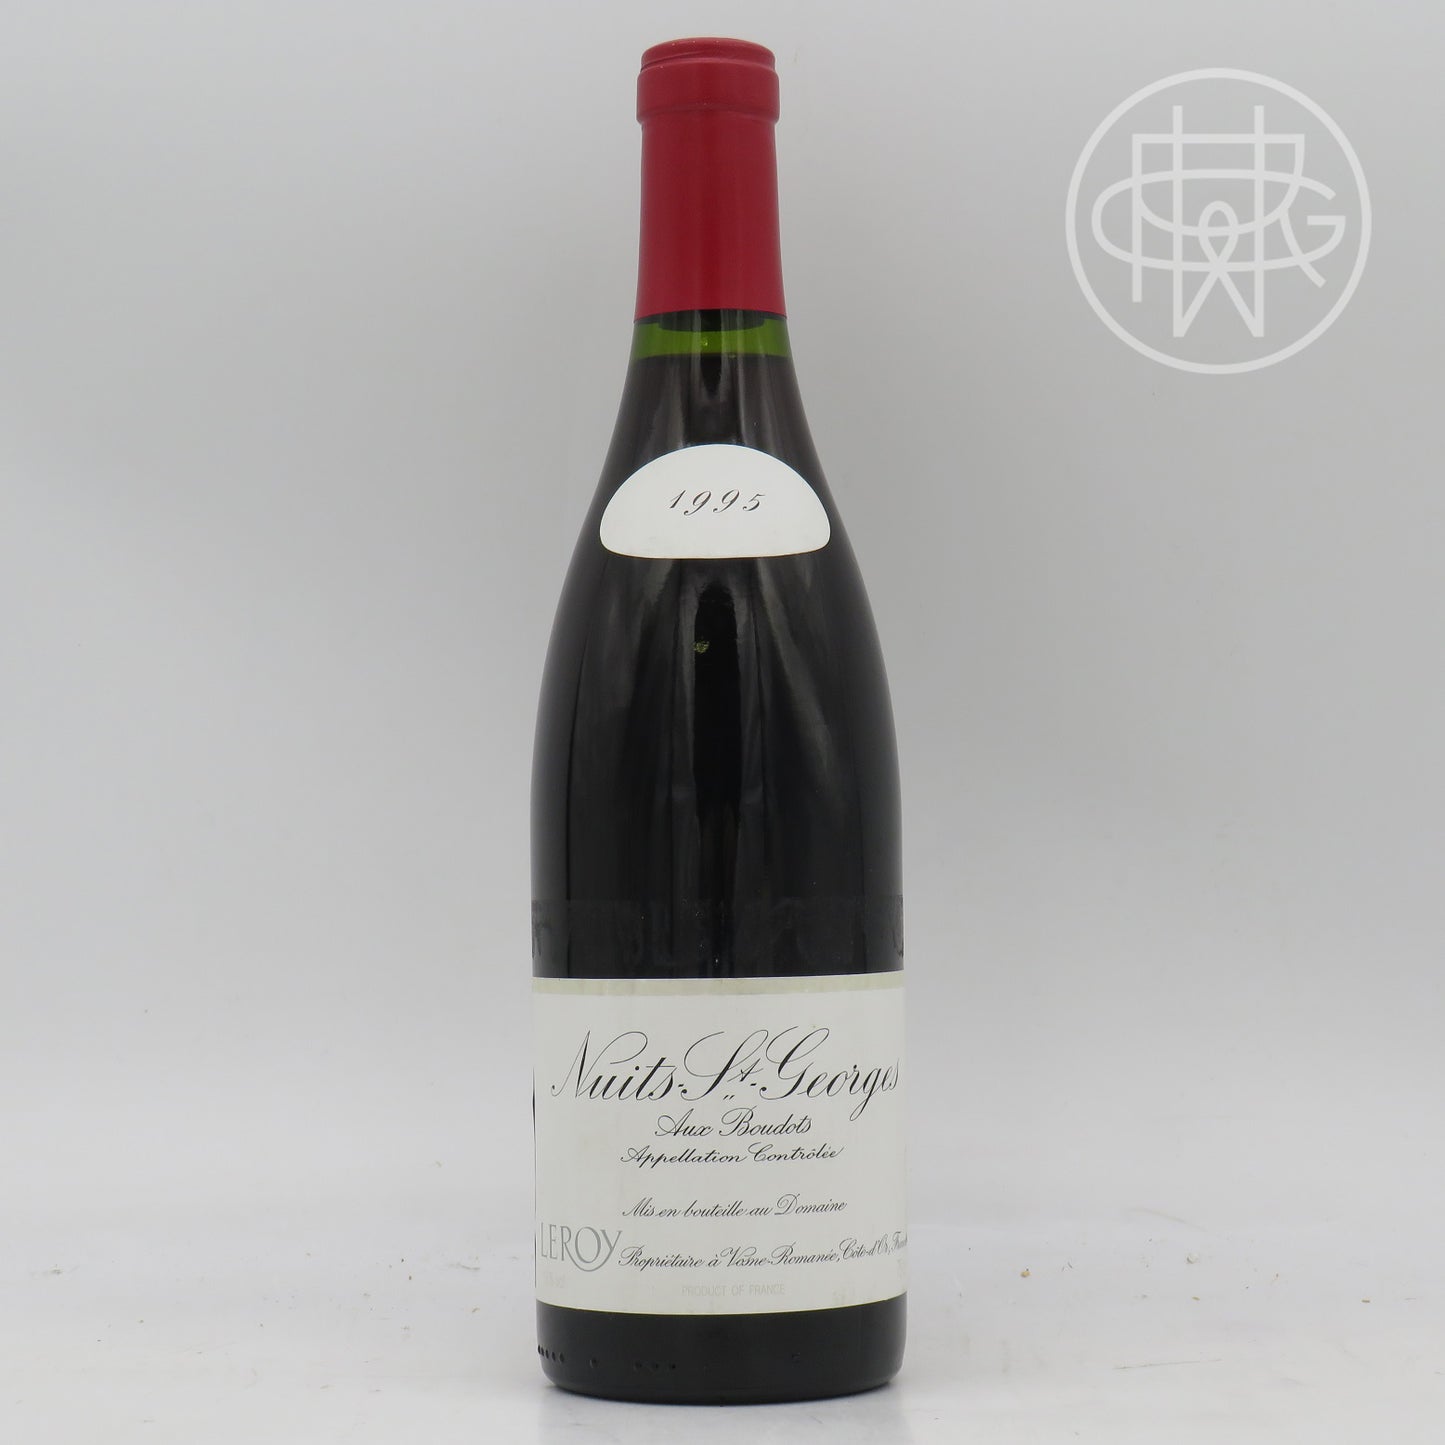 Leroy Nuits St. Georges Les Boudots 1995 750mL (Soiled/Scuffed Back Label)